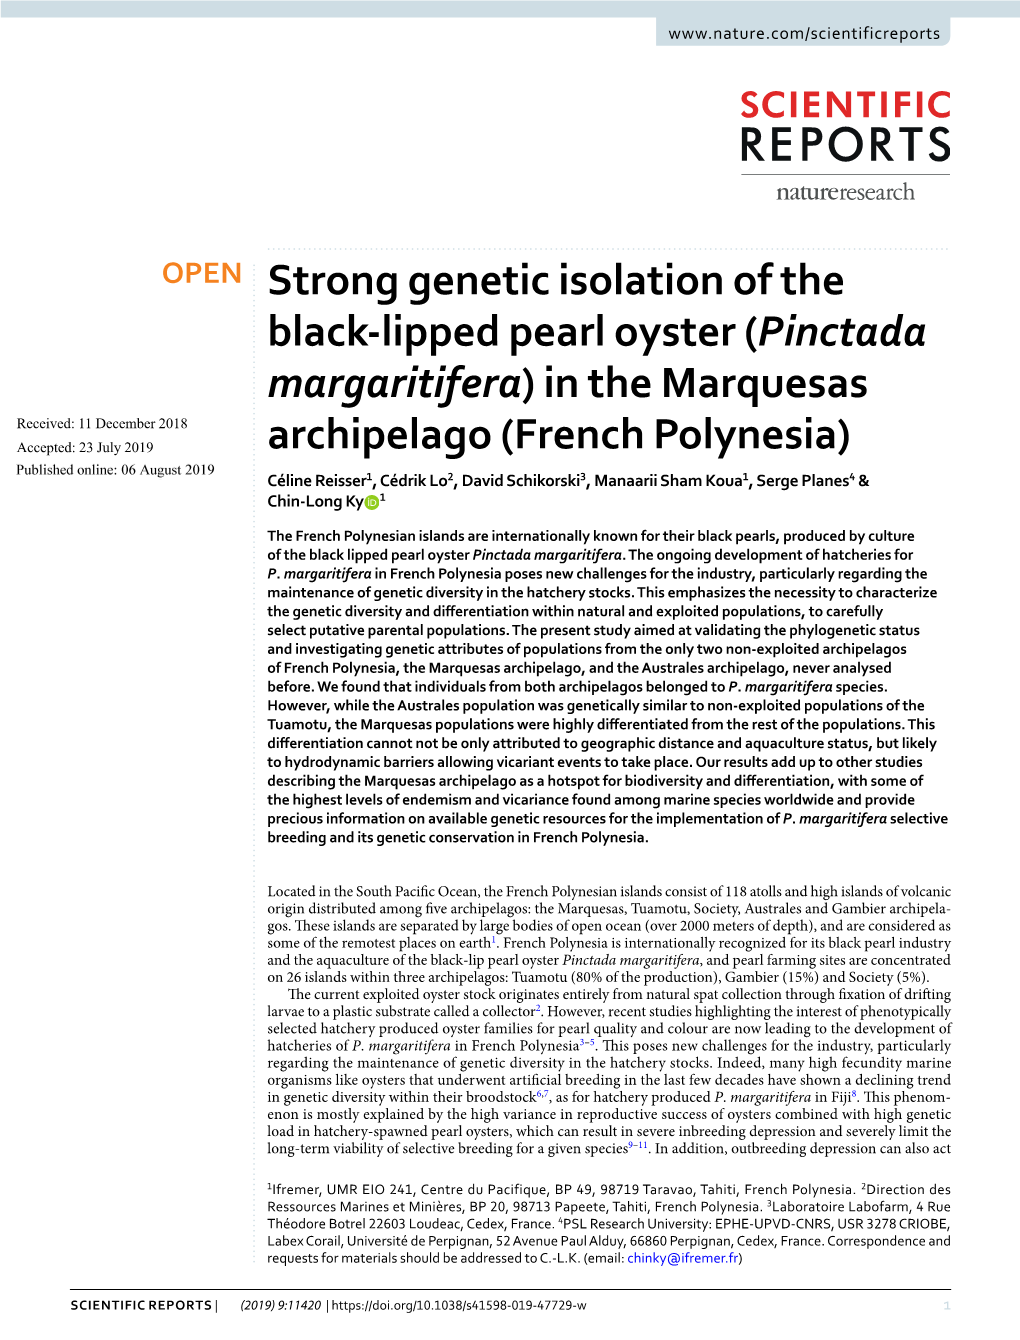 Strong Genetic Isolation of the Black-Lipped Pearl Oyster (Pinctada Margaritifera) in the Marquesas Archipelago (French Polynesi